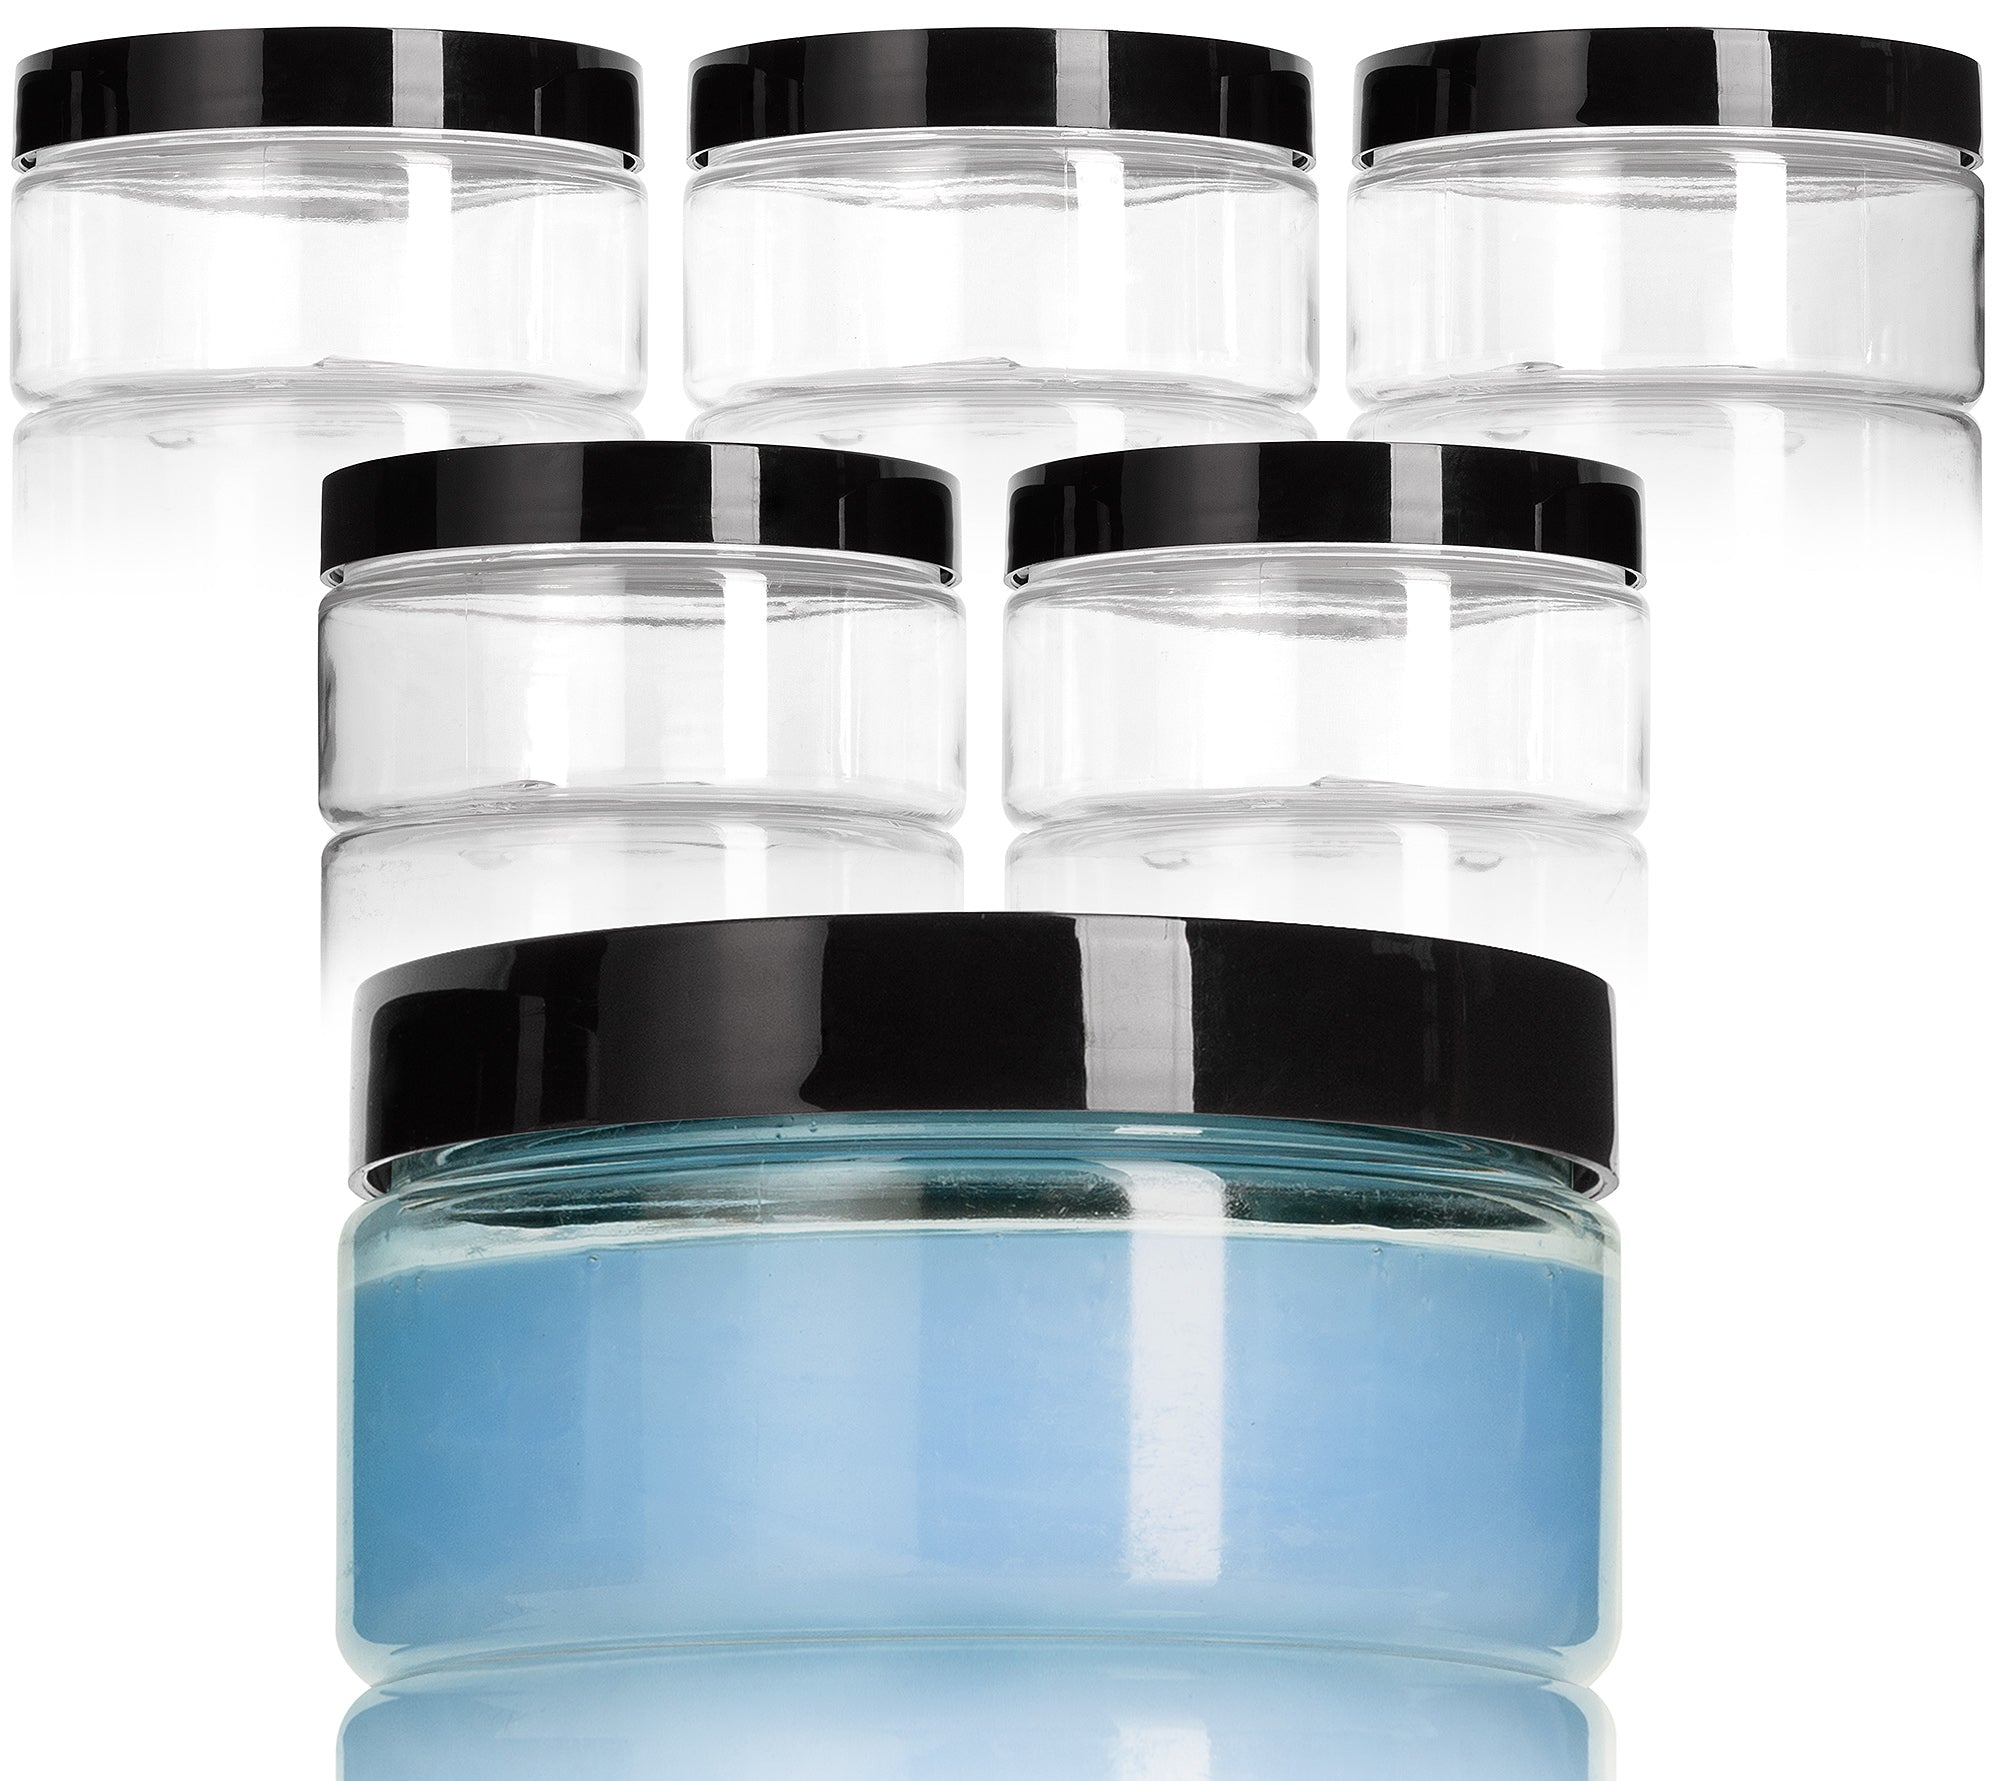  Loretoy Household 4oz Plastic Jars with Lids, 50 Pack BPA Free,  Reusable, Refillable Transparent Cosmetic Containers for Bath Salts,  Cosmetics, Powders, Beauty Product and Small Accessories: Home & Kitchen